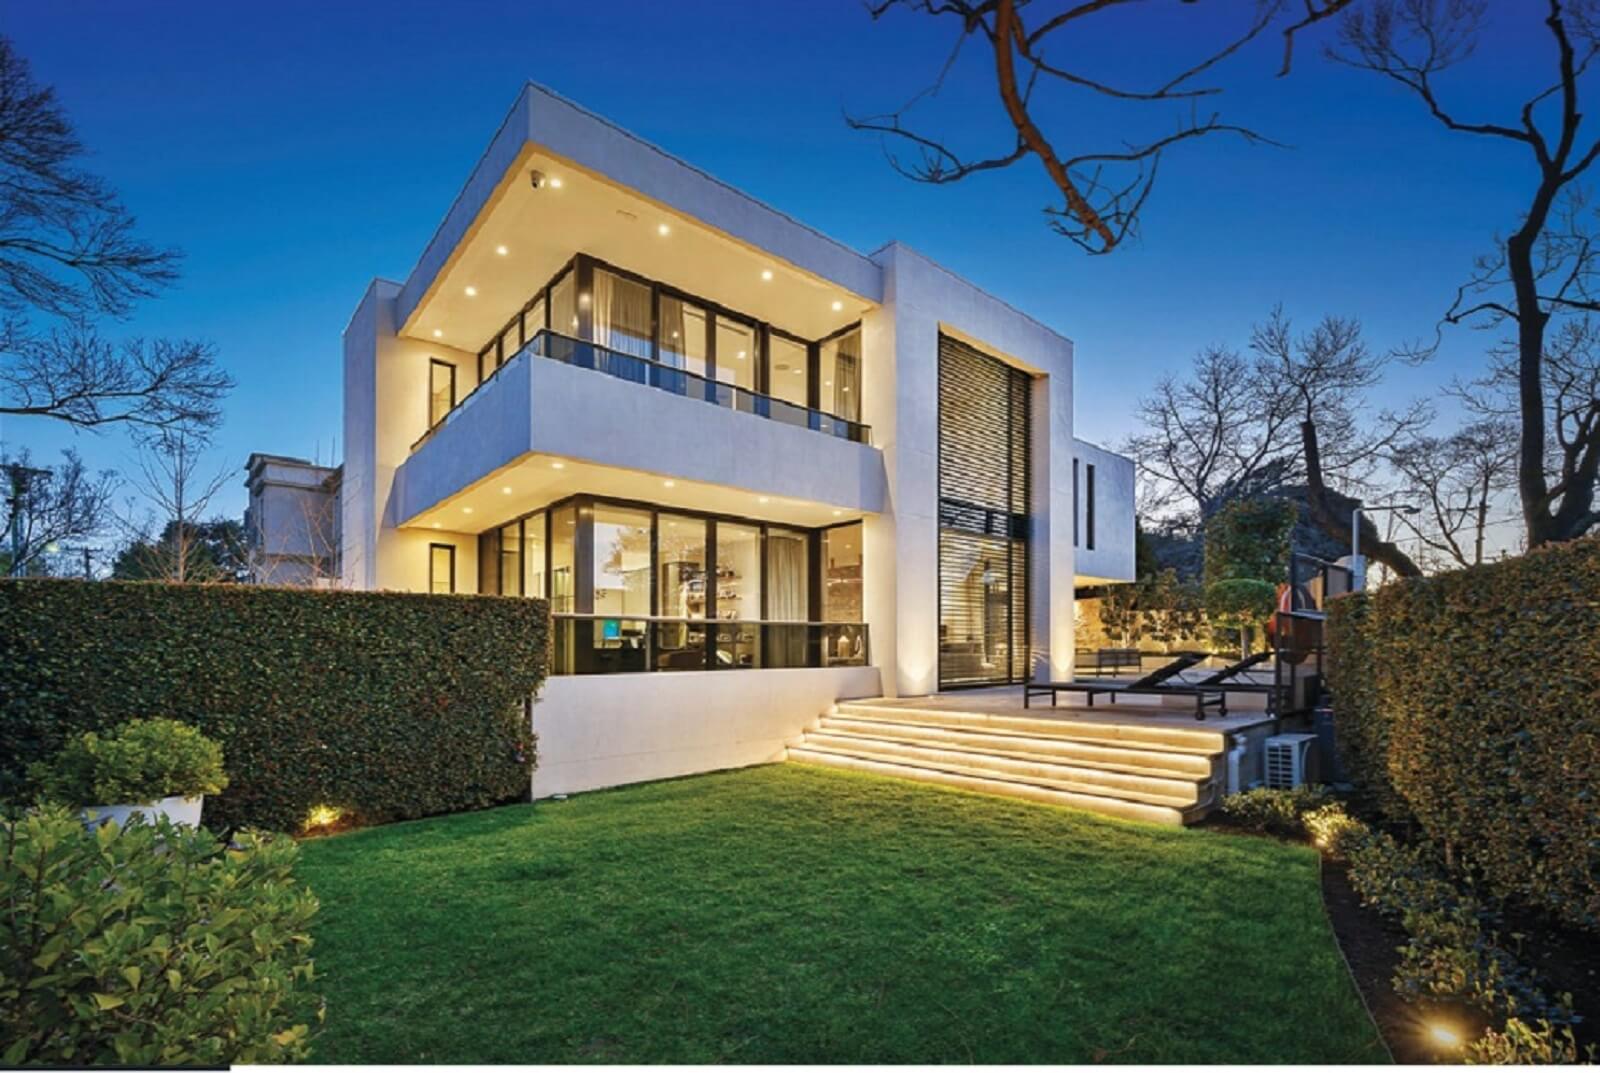 Stunning well lit facade of Toorak home automation mansion